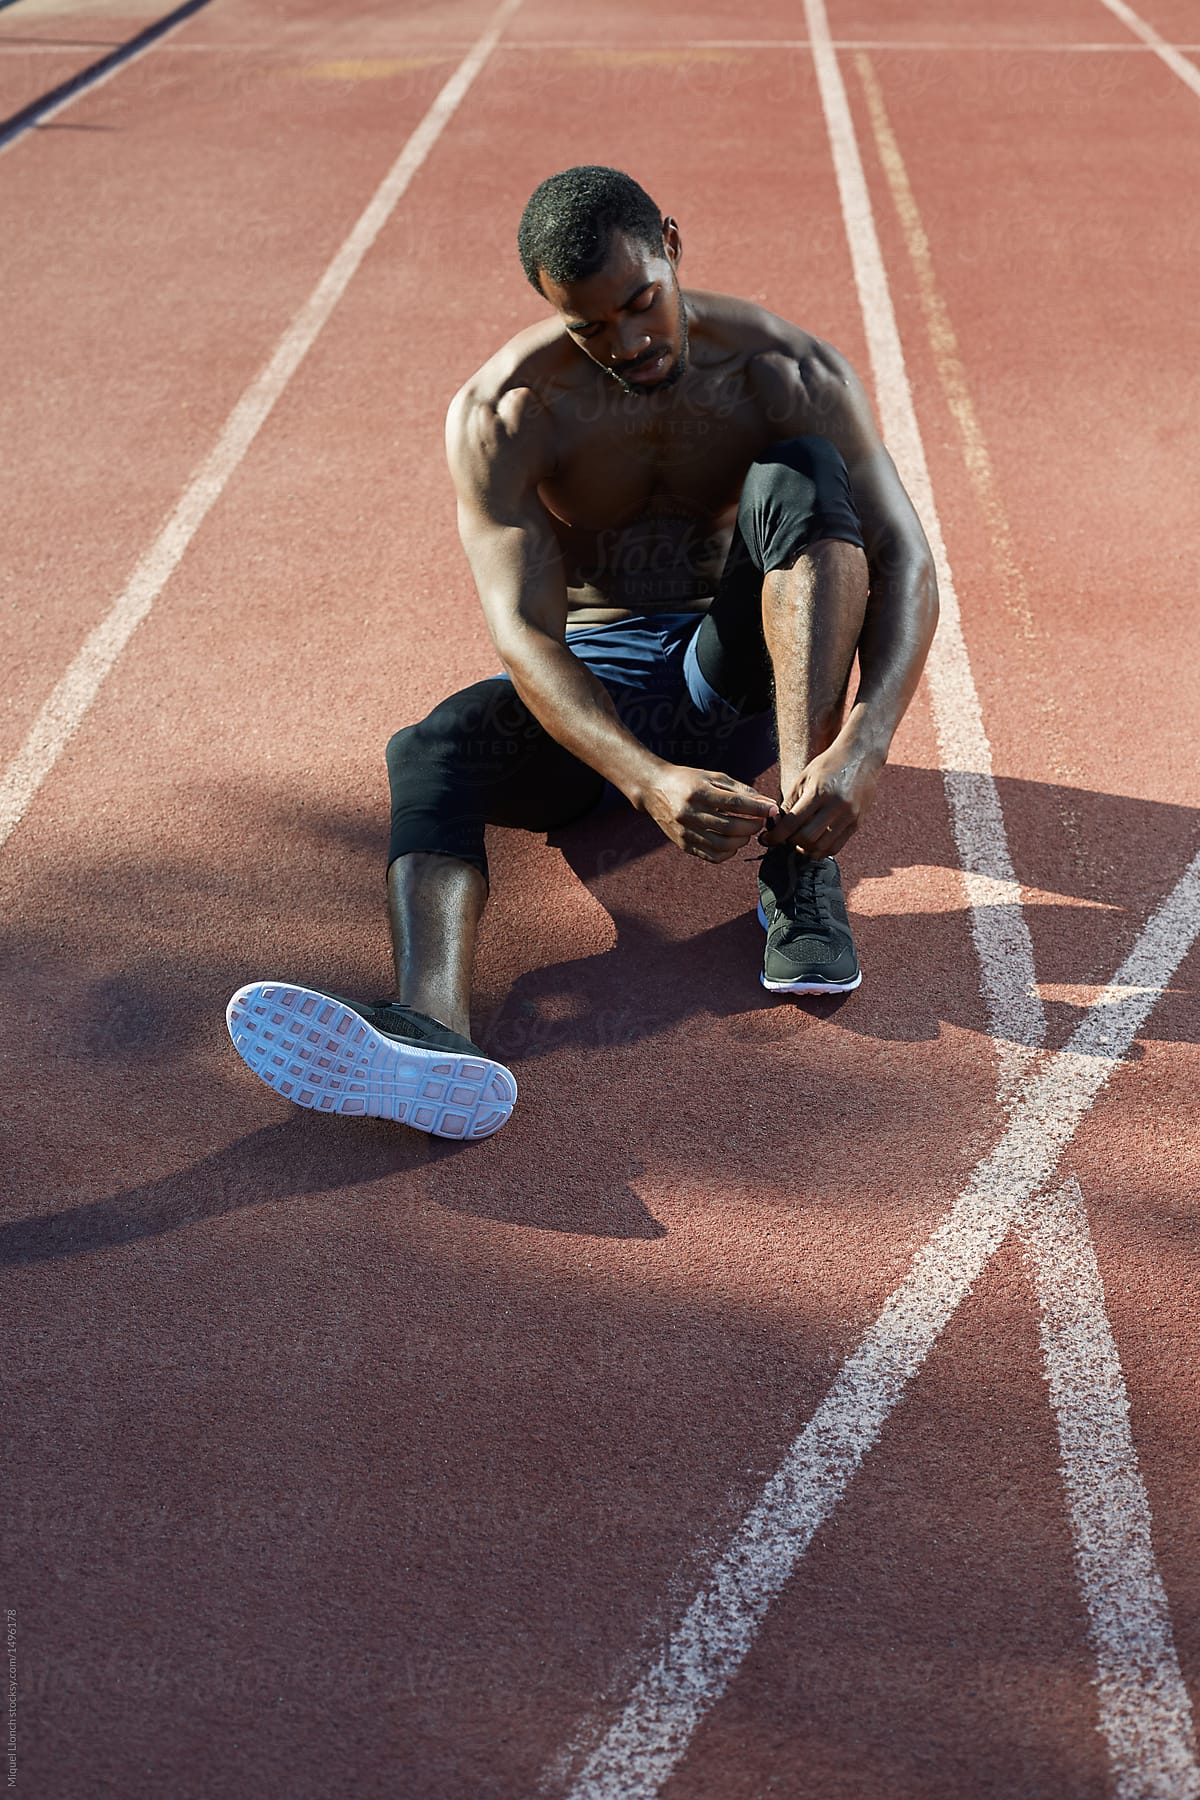 Black athlete tying his shoes  in the track and field